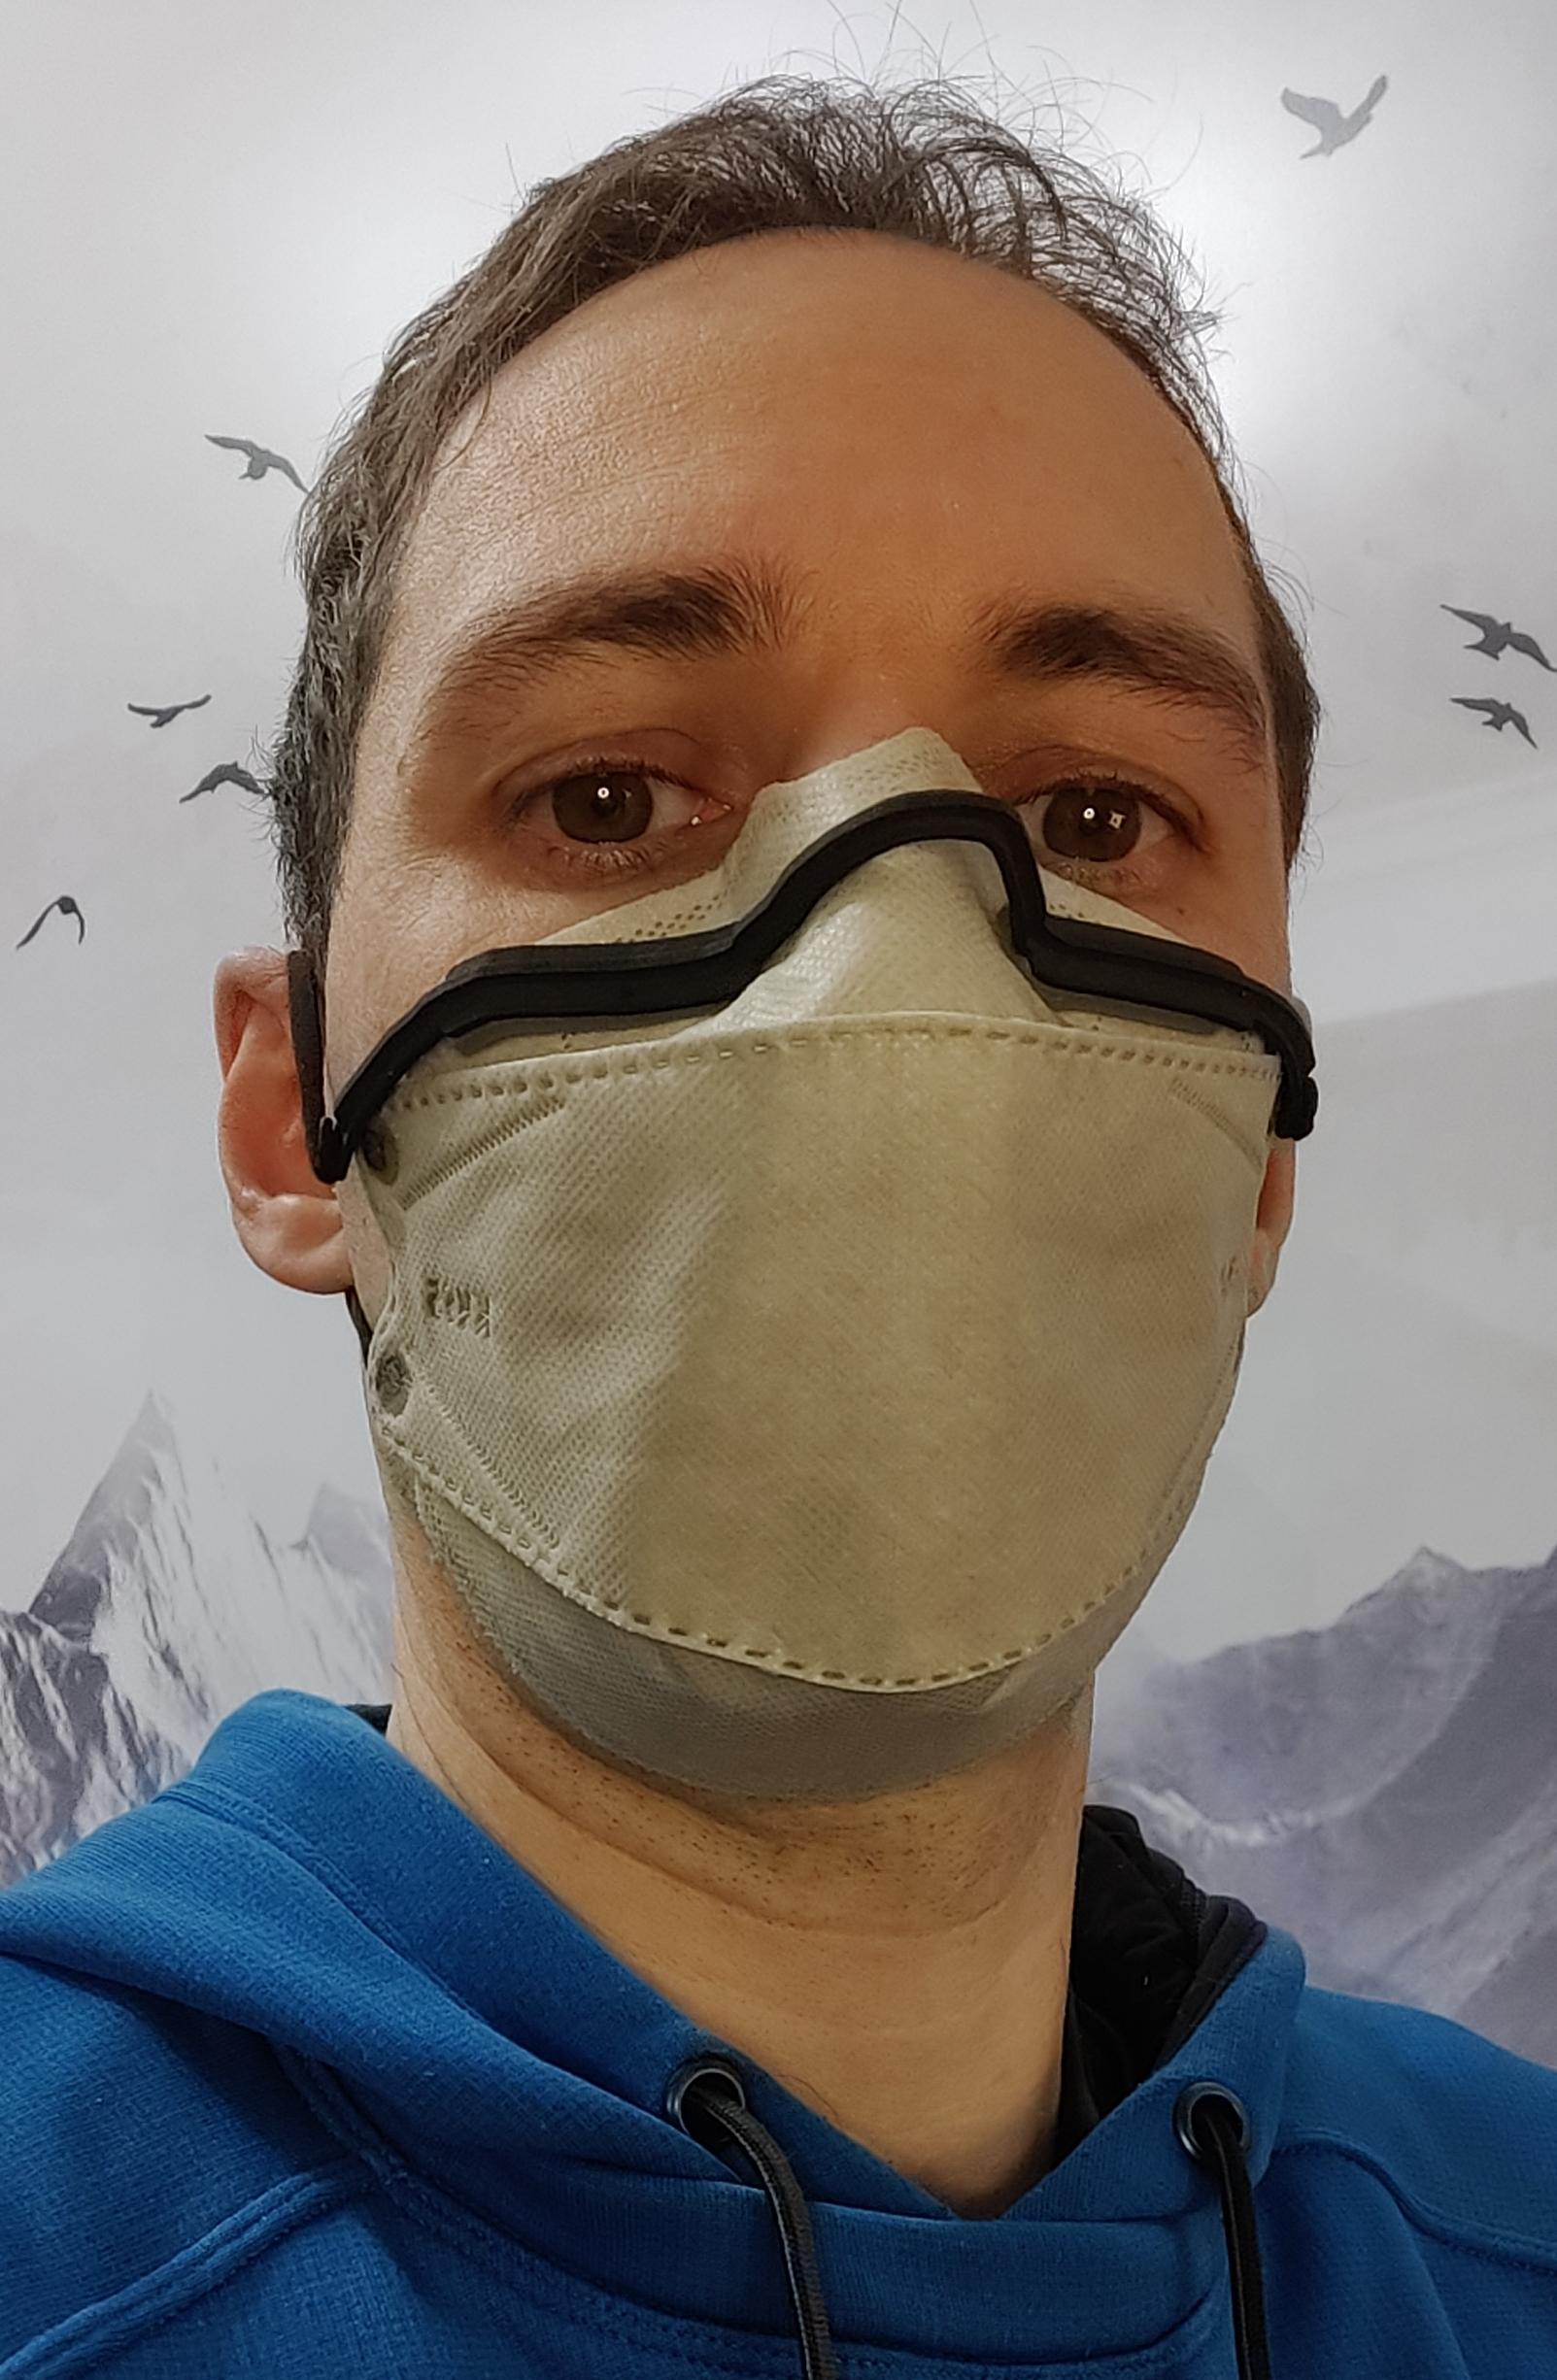 Air-tight N95 Face Mask Braces for Makers With Long Noses (Look Mom, No Fog!)